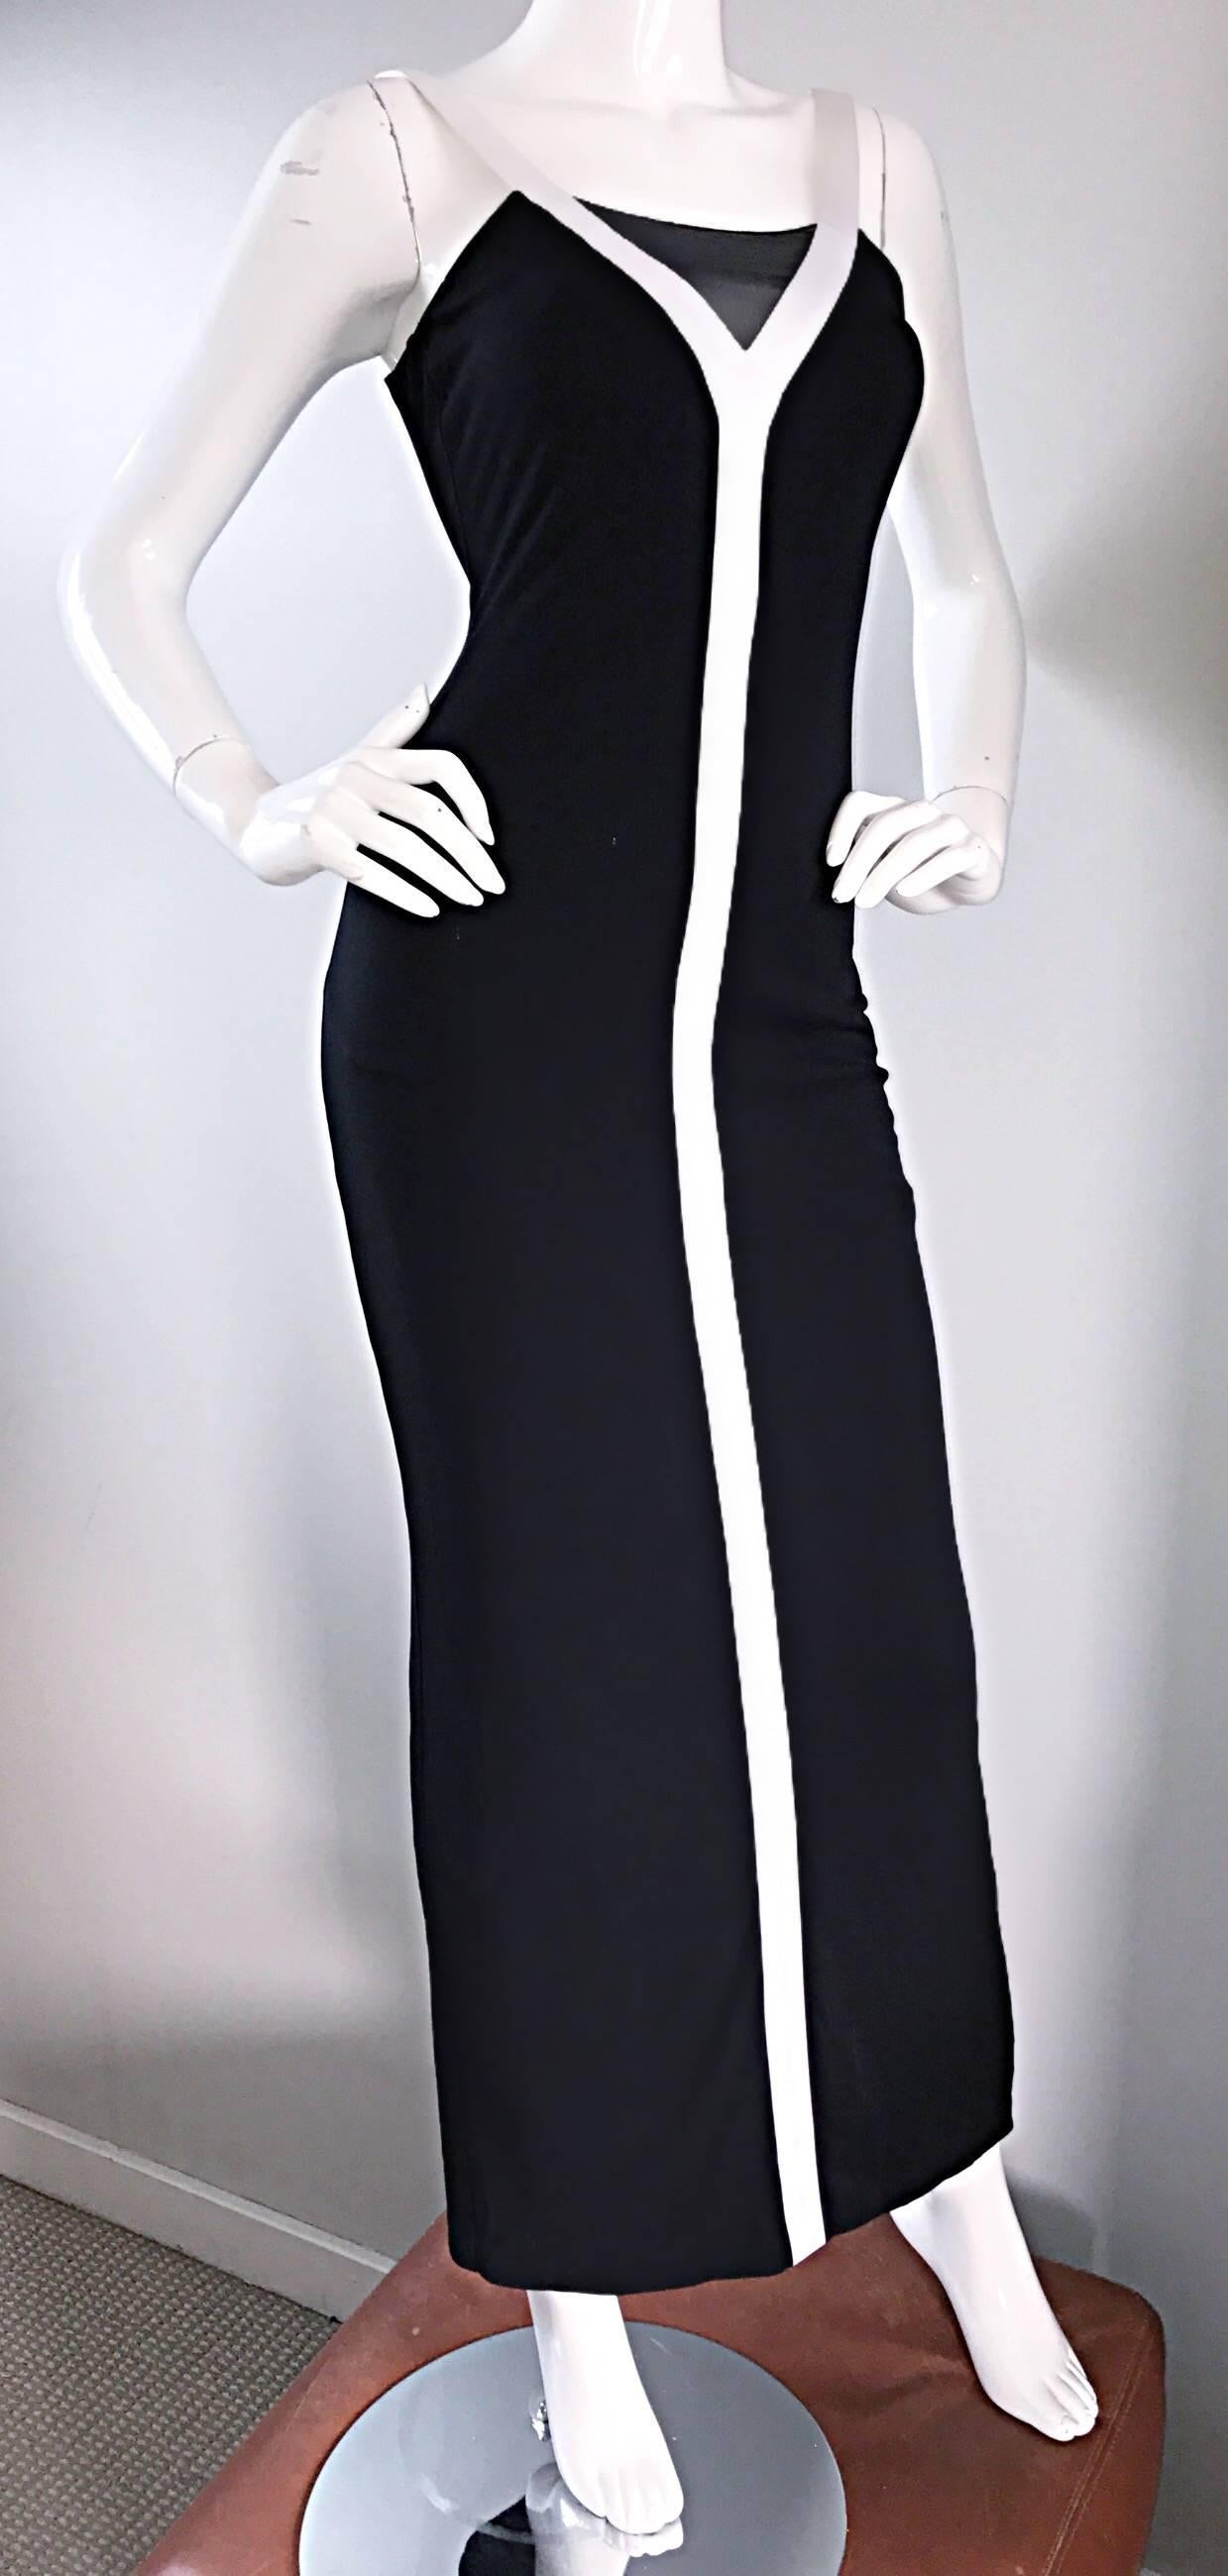 Dolce & Gabbana 1990s Vintage Black and White Iconic Jersey Dress Gown Dress For Sale 3